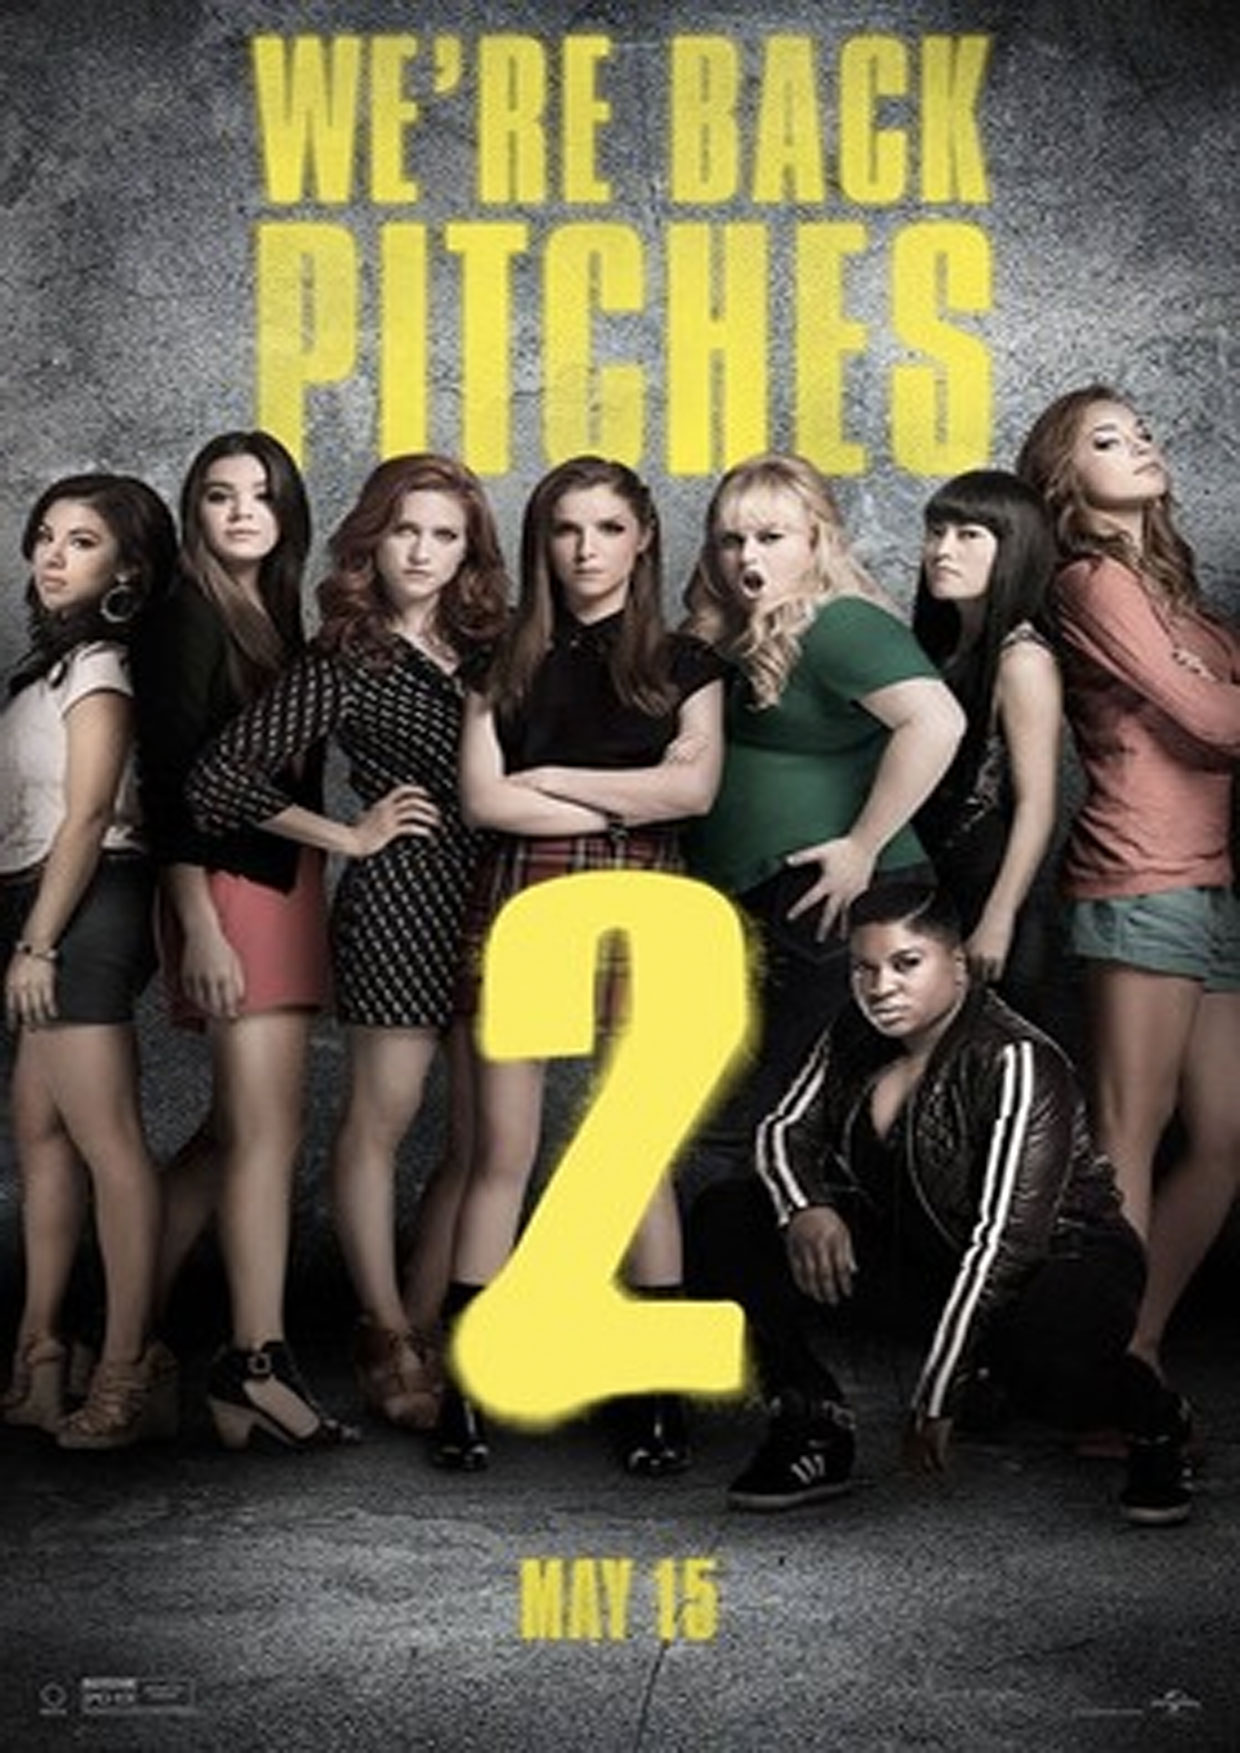 pitchperfect2(2)